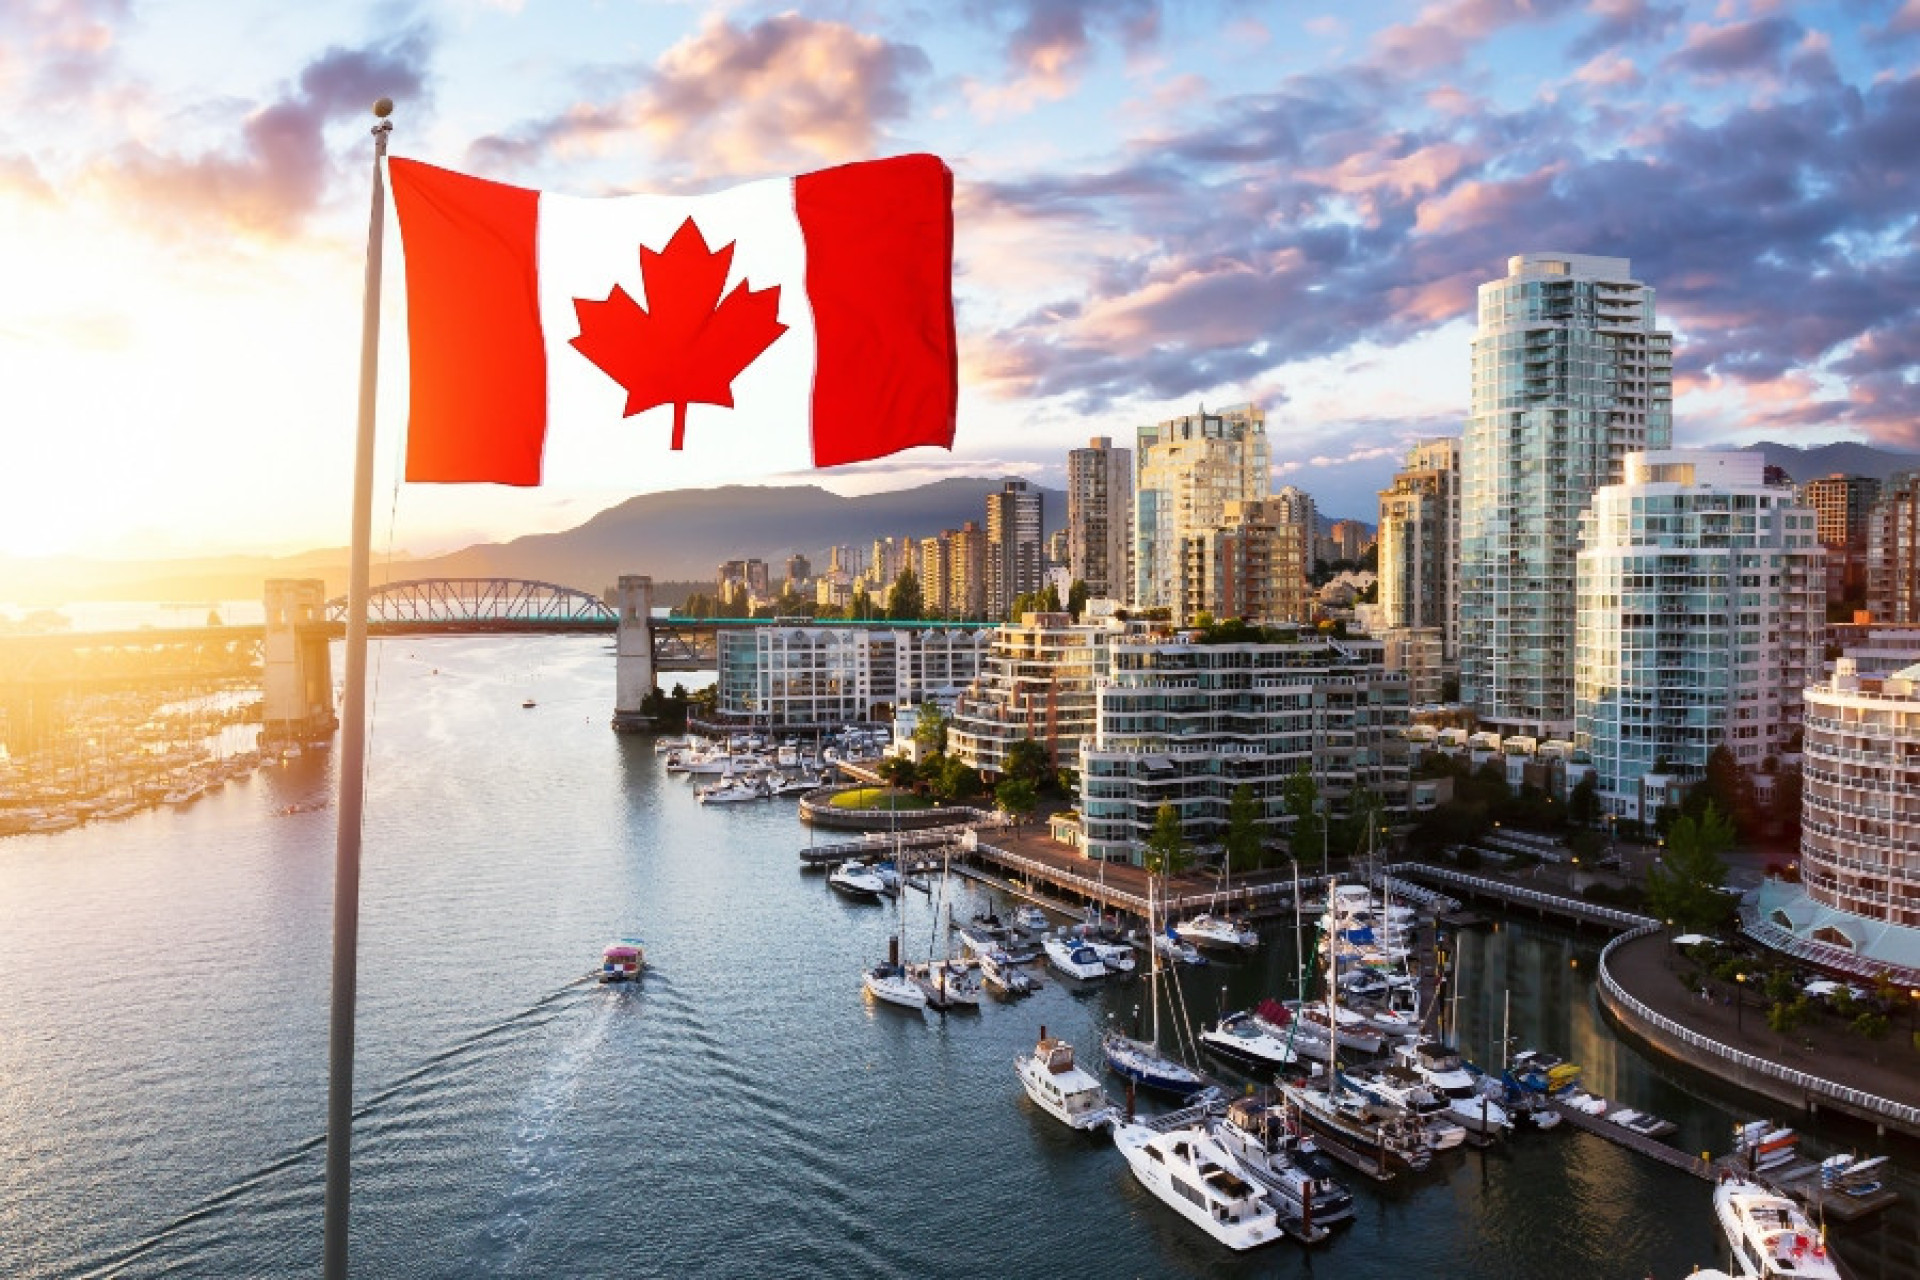 <p>This ranking reflects the nation's strong healthcare system, robust public health measures, and high living standards. It underscores Canada's dedication to ensuring the longevity and health of its populace.</p><p><a href="https://www.msn.com/en-us/community/channel/vid-7xx8mnucu55yw63we9va2gwr7uihbxwc68fxqp25x6tg4ftibpra?cvid=94631541bc0f4f89bfd59158d696ad7e">Follow us and access great exclusive content every day</a></p>